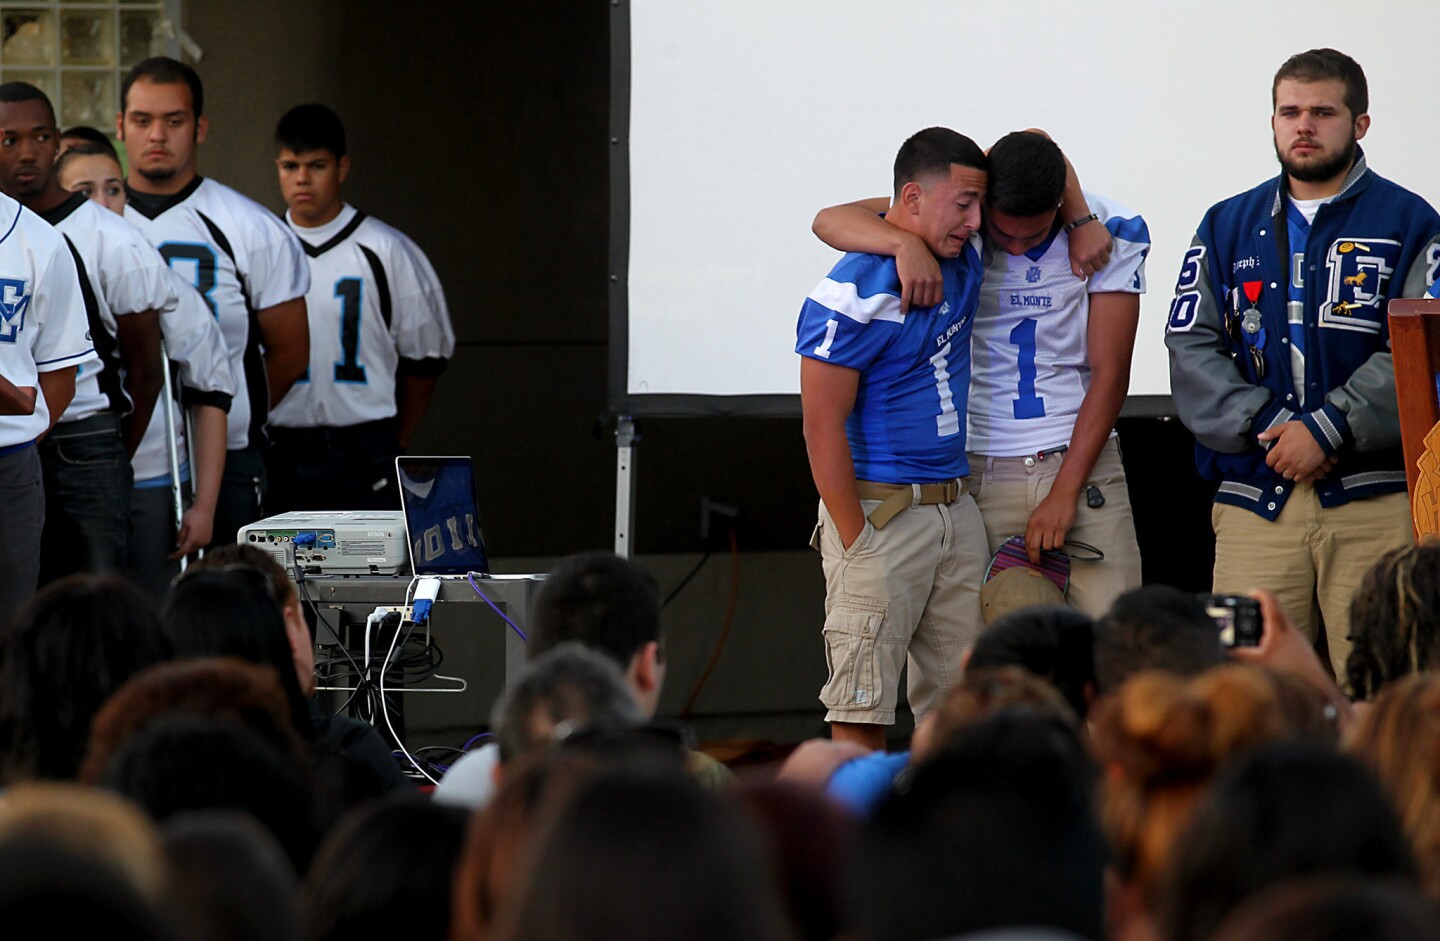 El Monte High School football players embrace during a candlelight vigil for a teammate, Adrian Castro, who was one of 10 people killed in the bus crash in Orland, Calif., last Thursday.